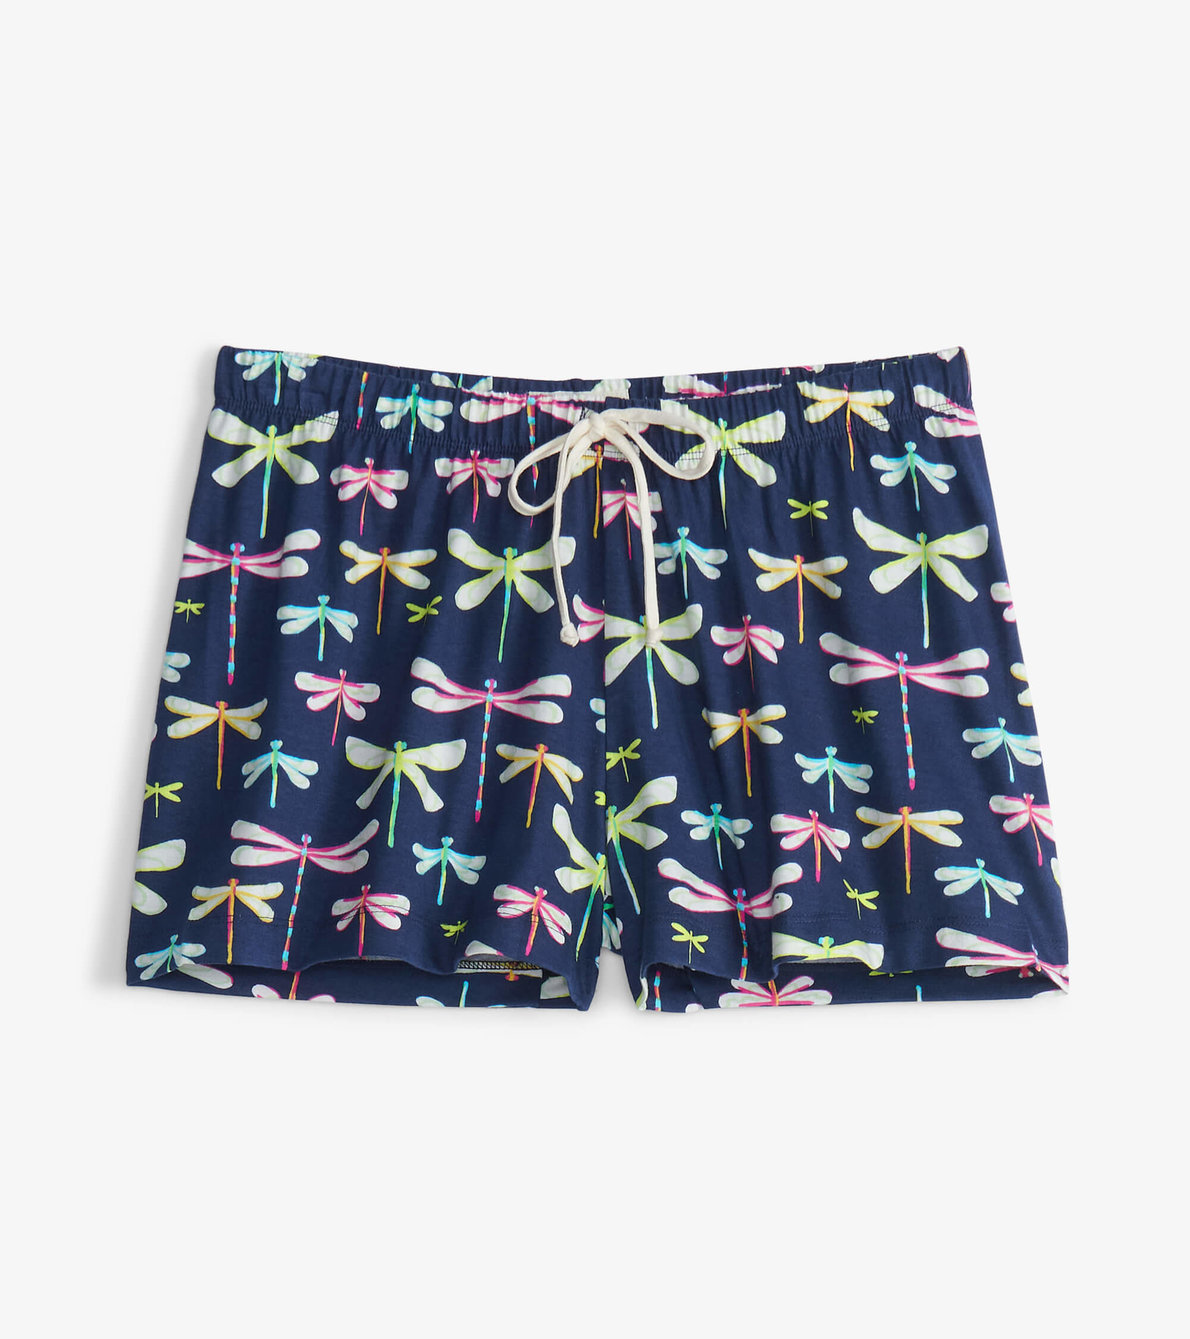 View larger image of Dragonflies Women's Sleep Shorts